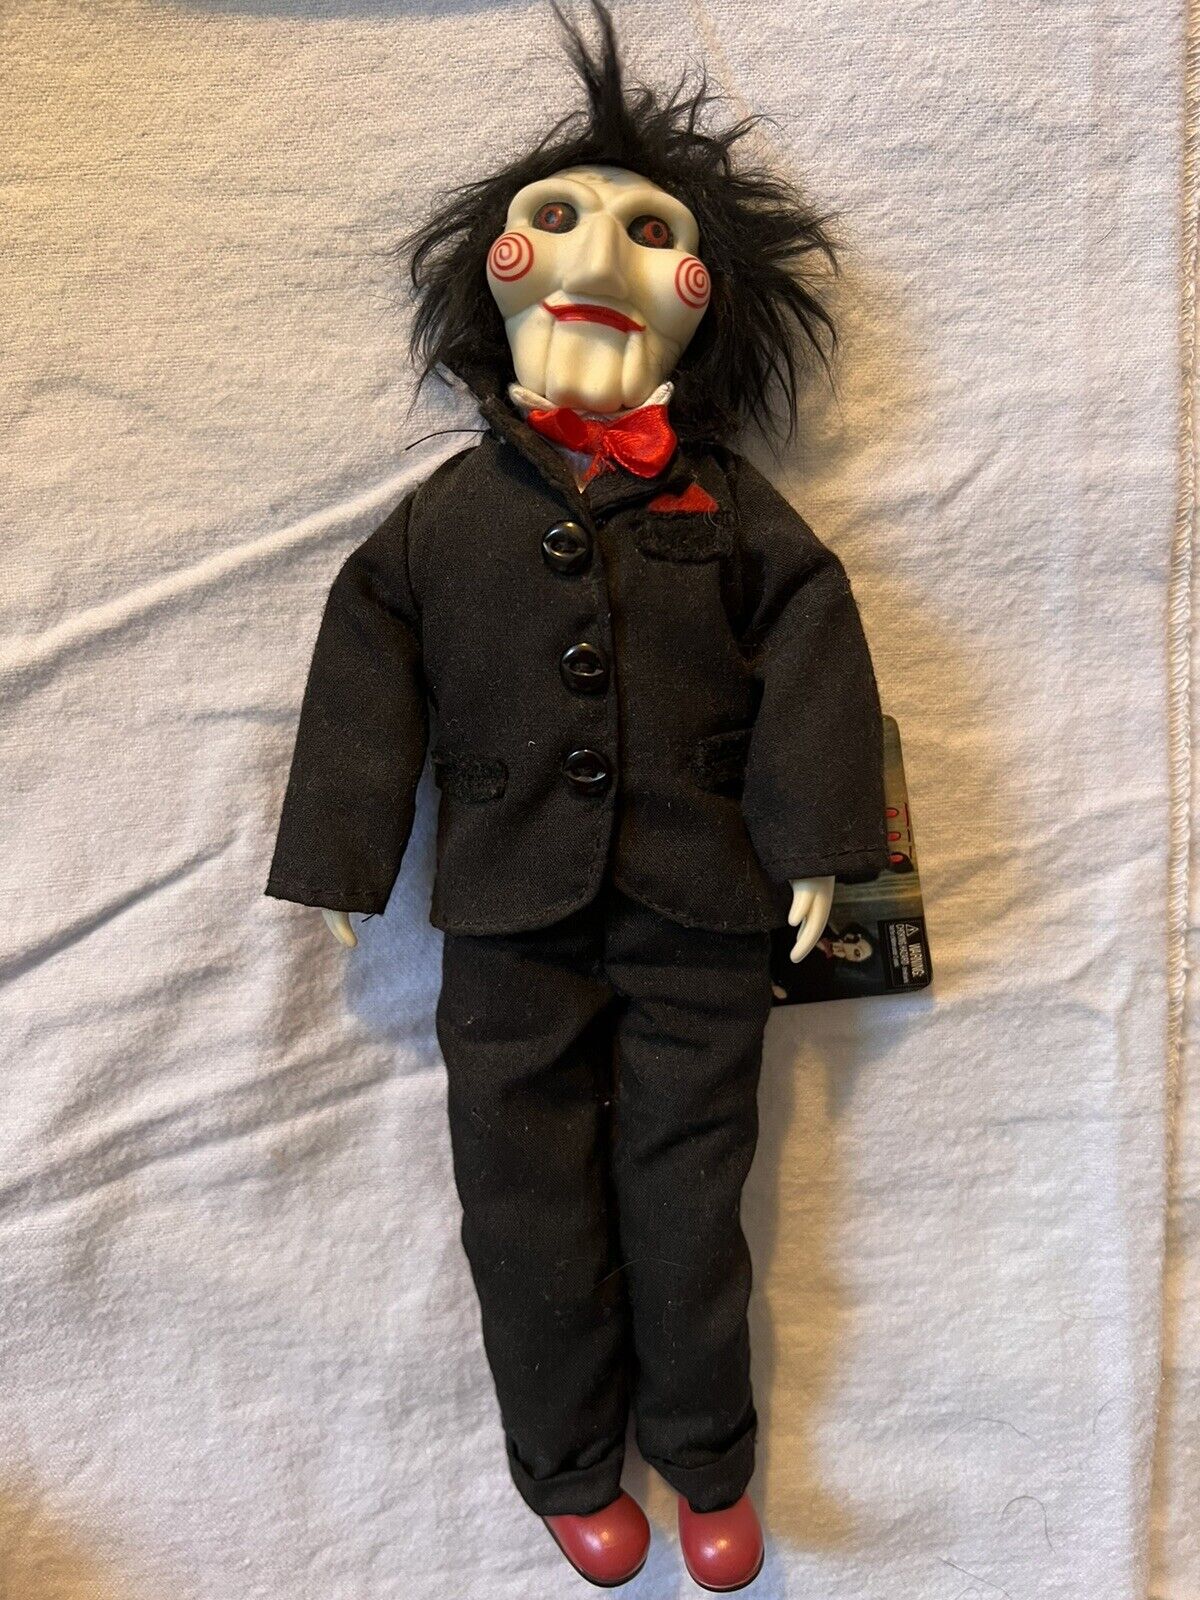 2004 Saw Billy Puppet 10” Plush NECA WITH ORIGINAL TAG